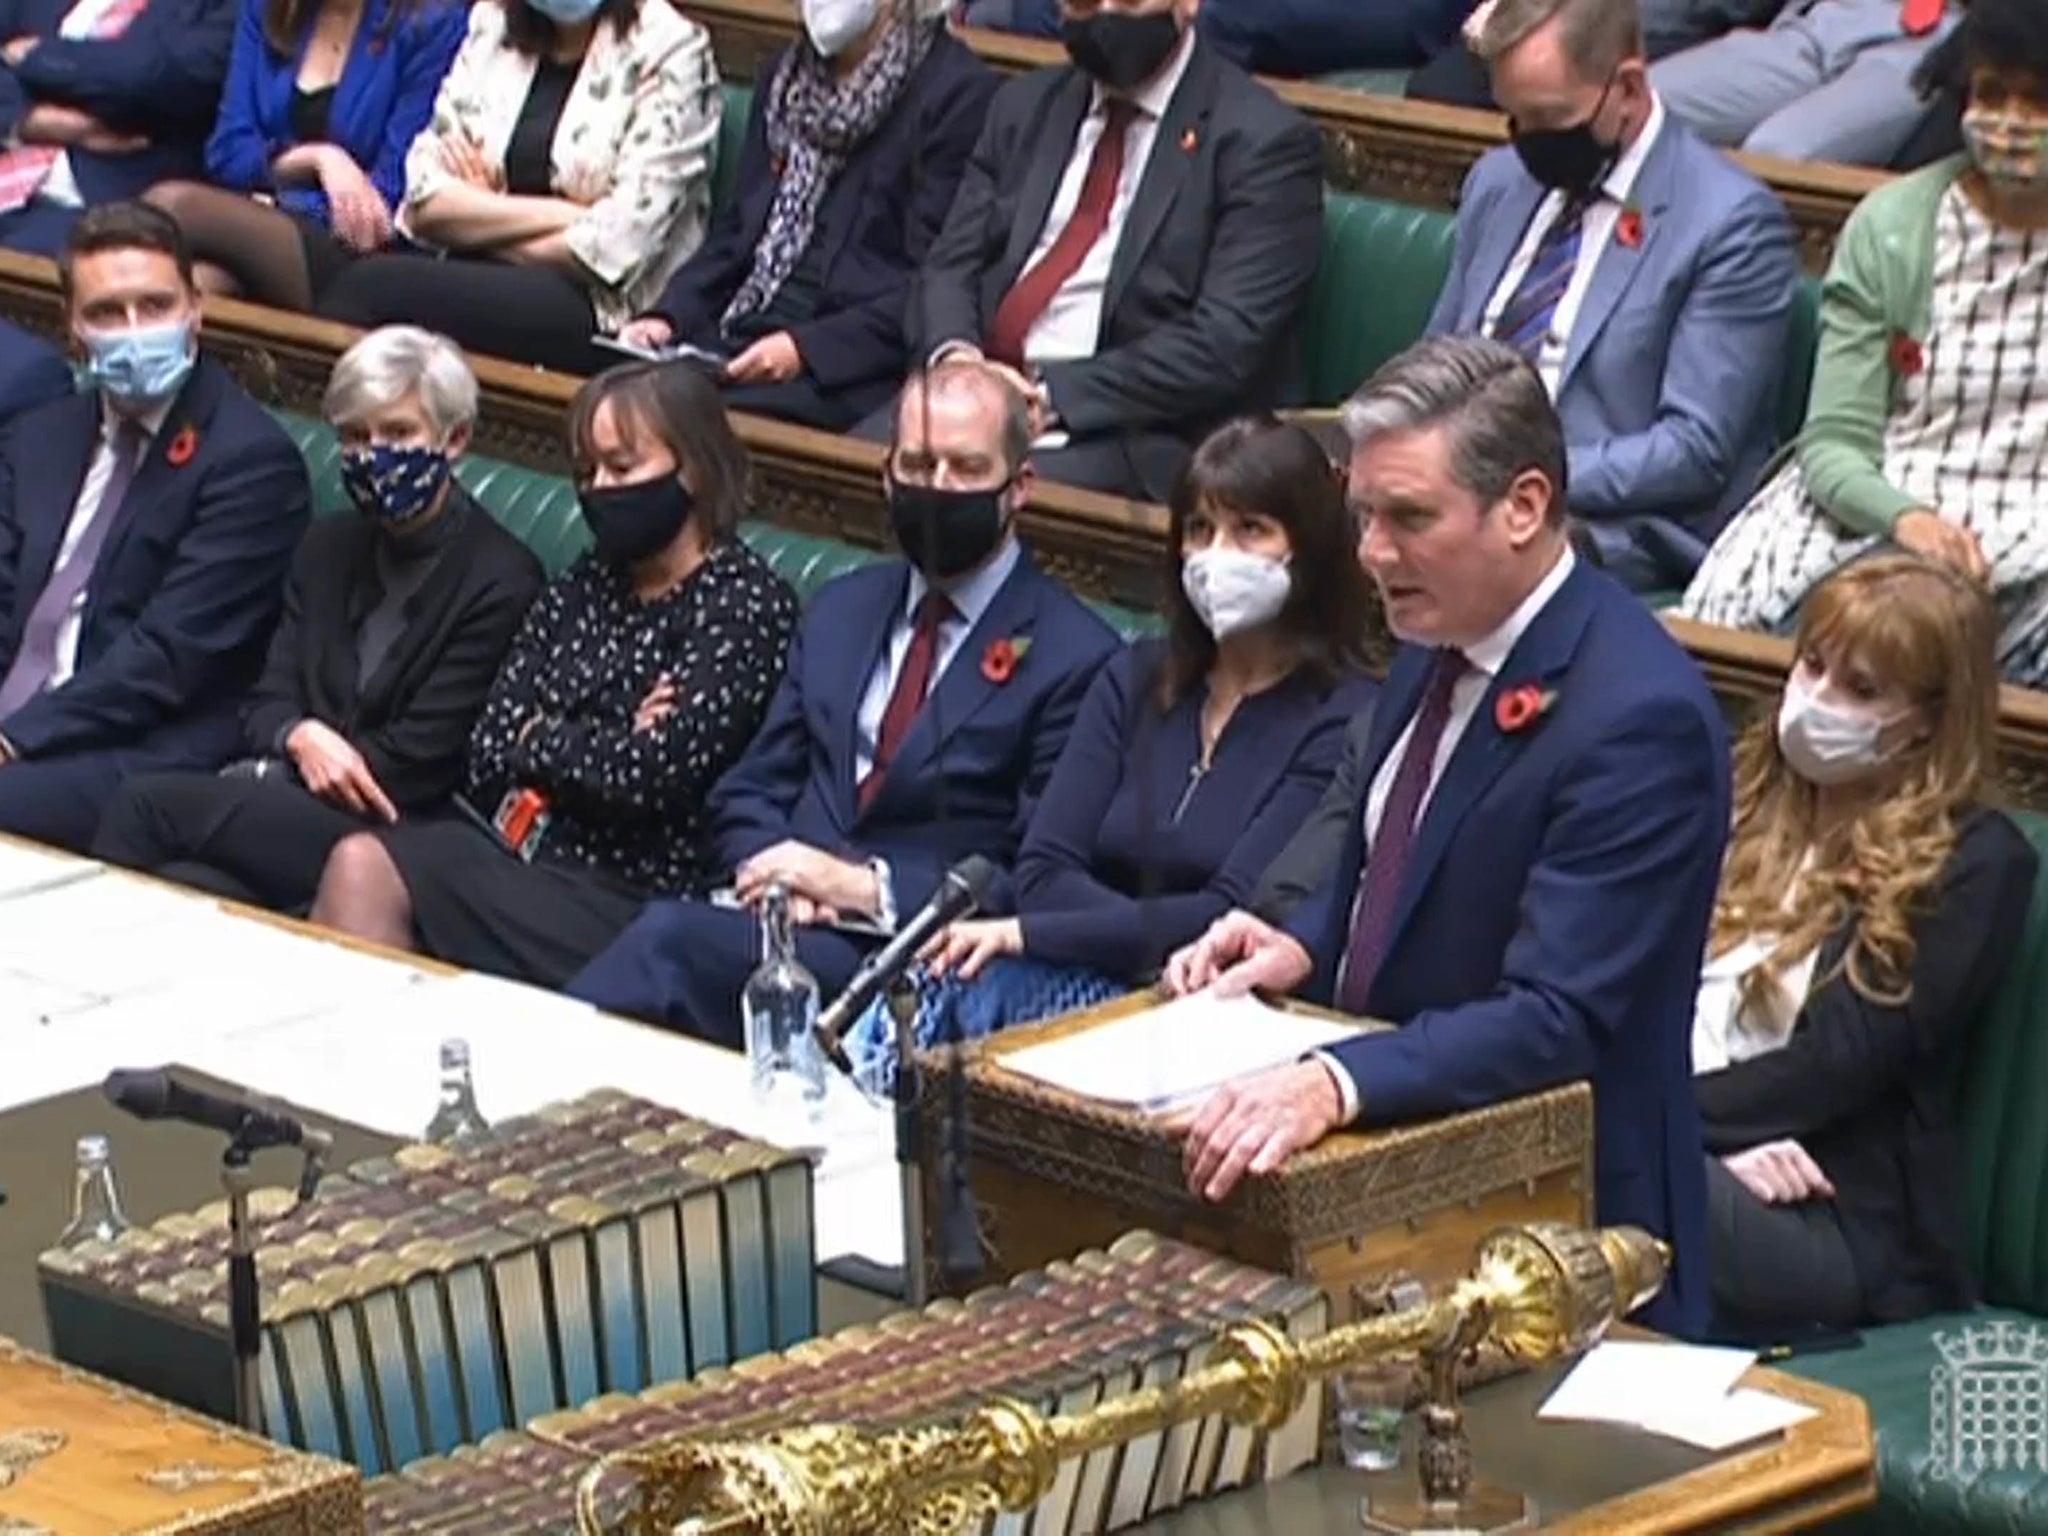 Keir Starmer unwisely widened his attack on the government